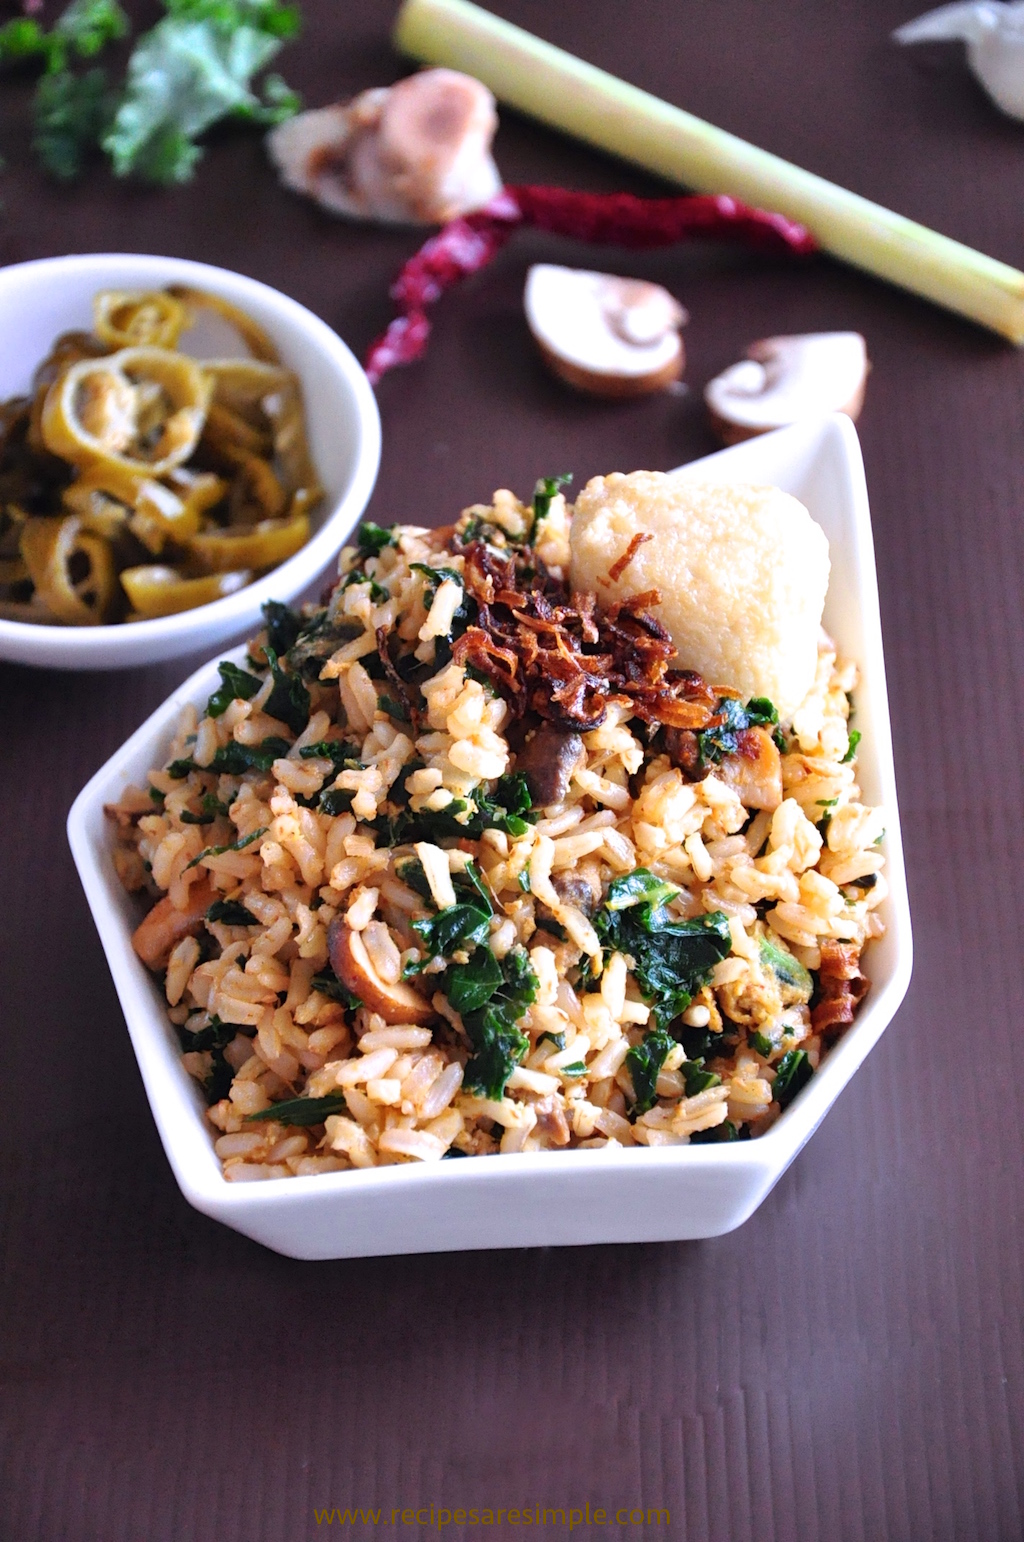 Kale Fried Rice made with Brown Rice, Egg and Mushrooms